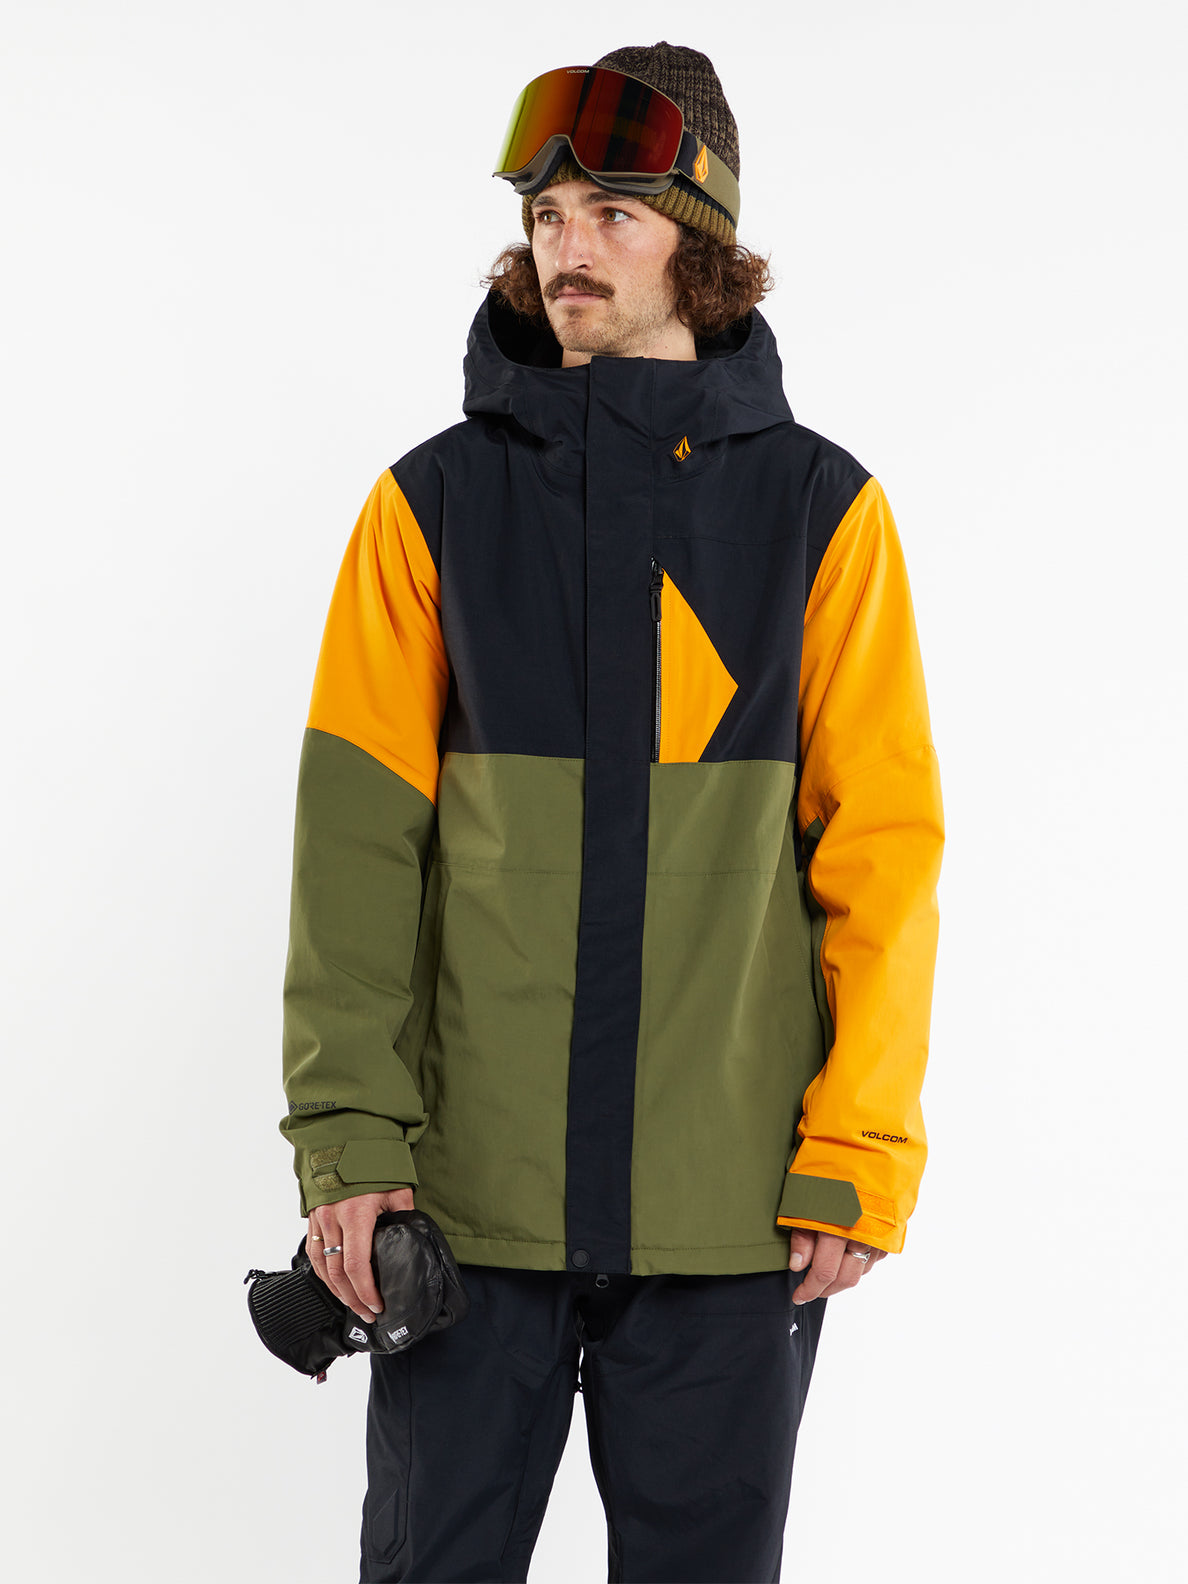 Mens L Insulated Gore-Tex Jacket - Gold – Volcom US